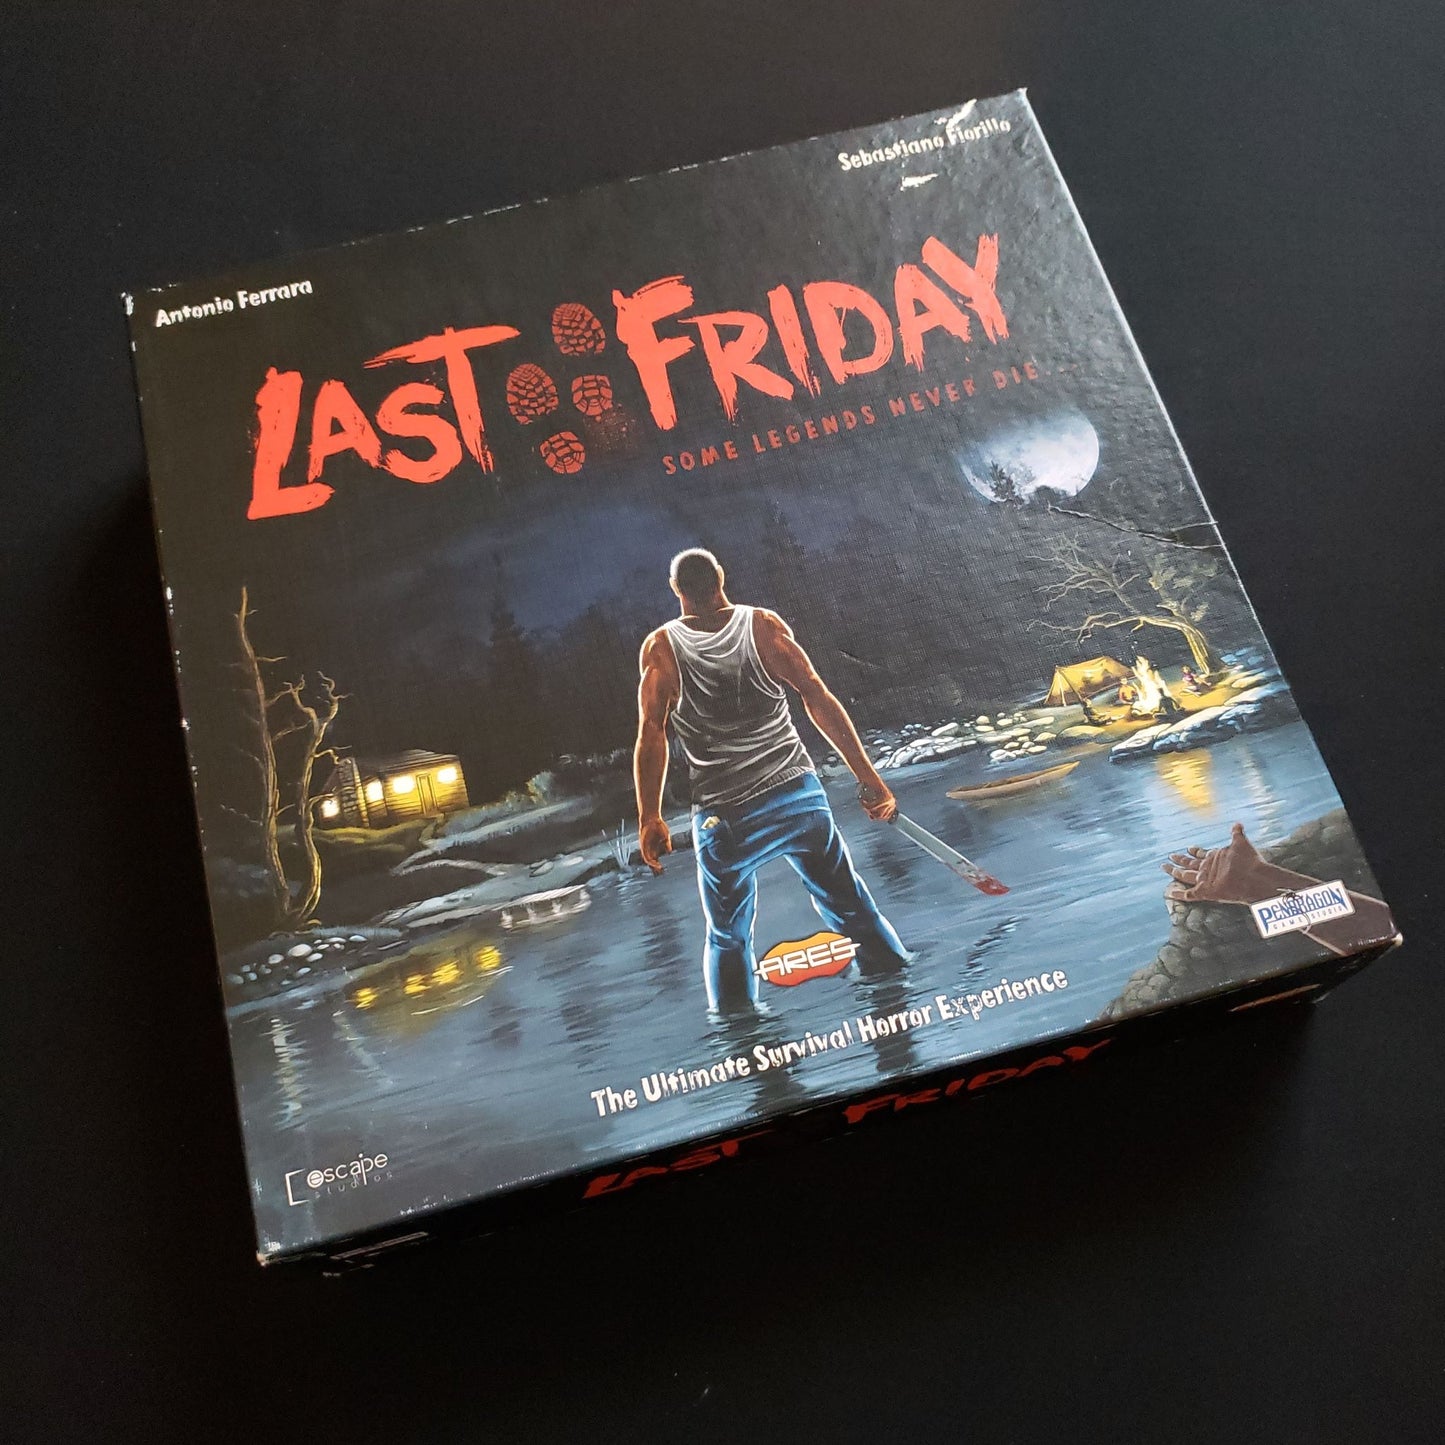 Last Friday board game - front cover of box